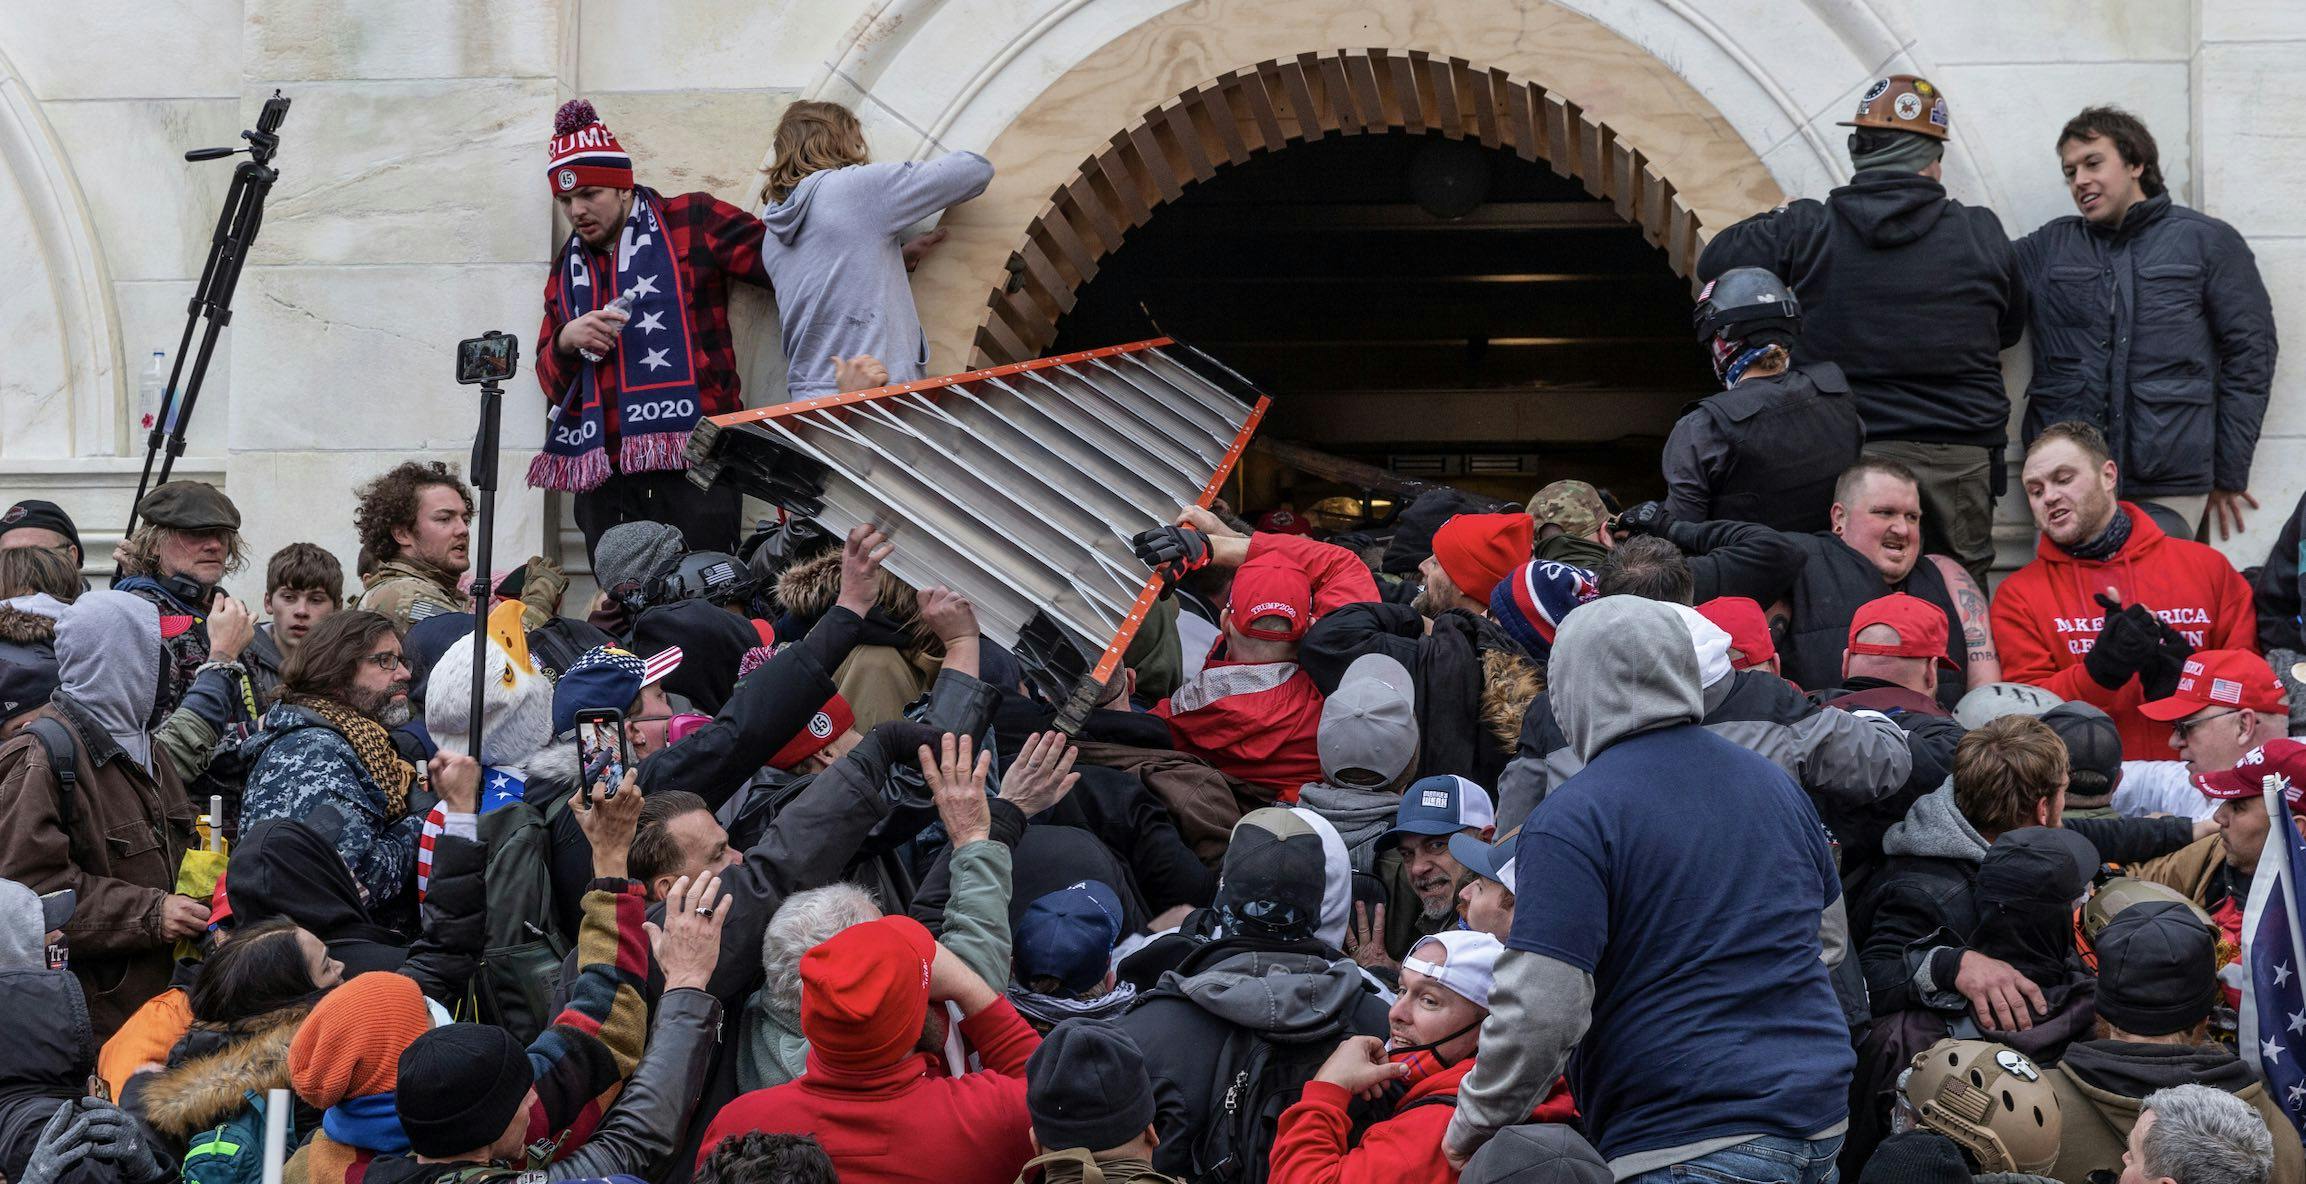 rioters attempting to break into the capito